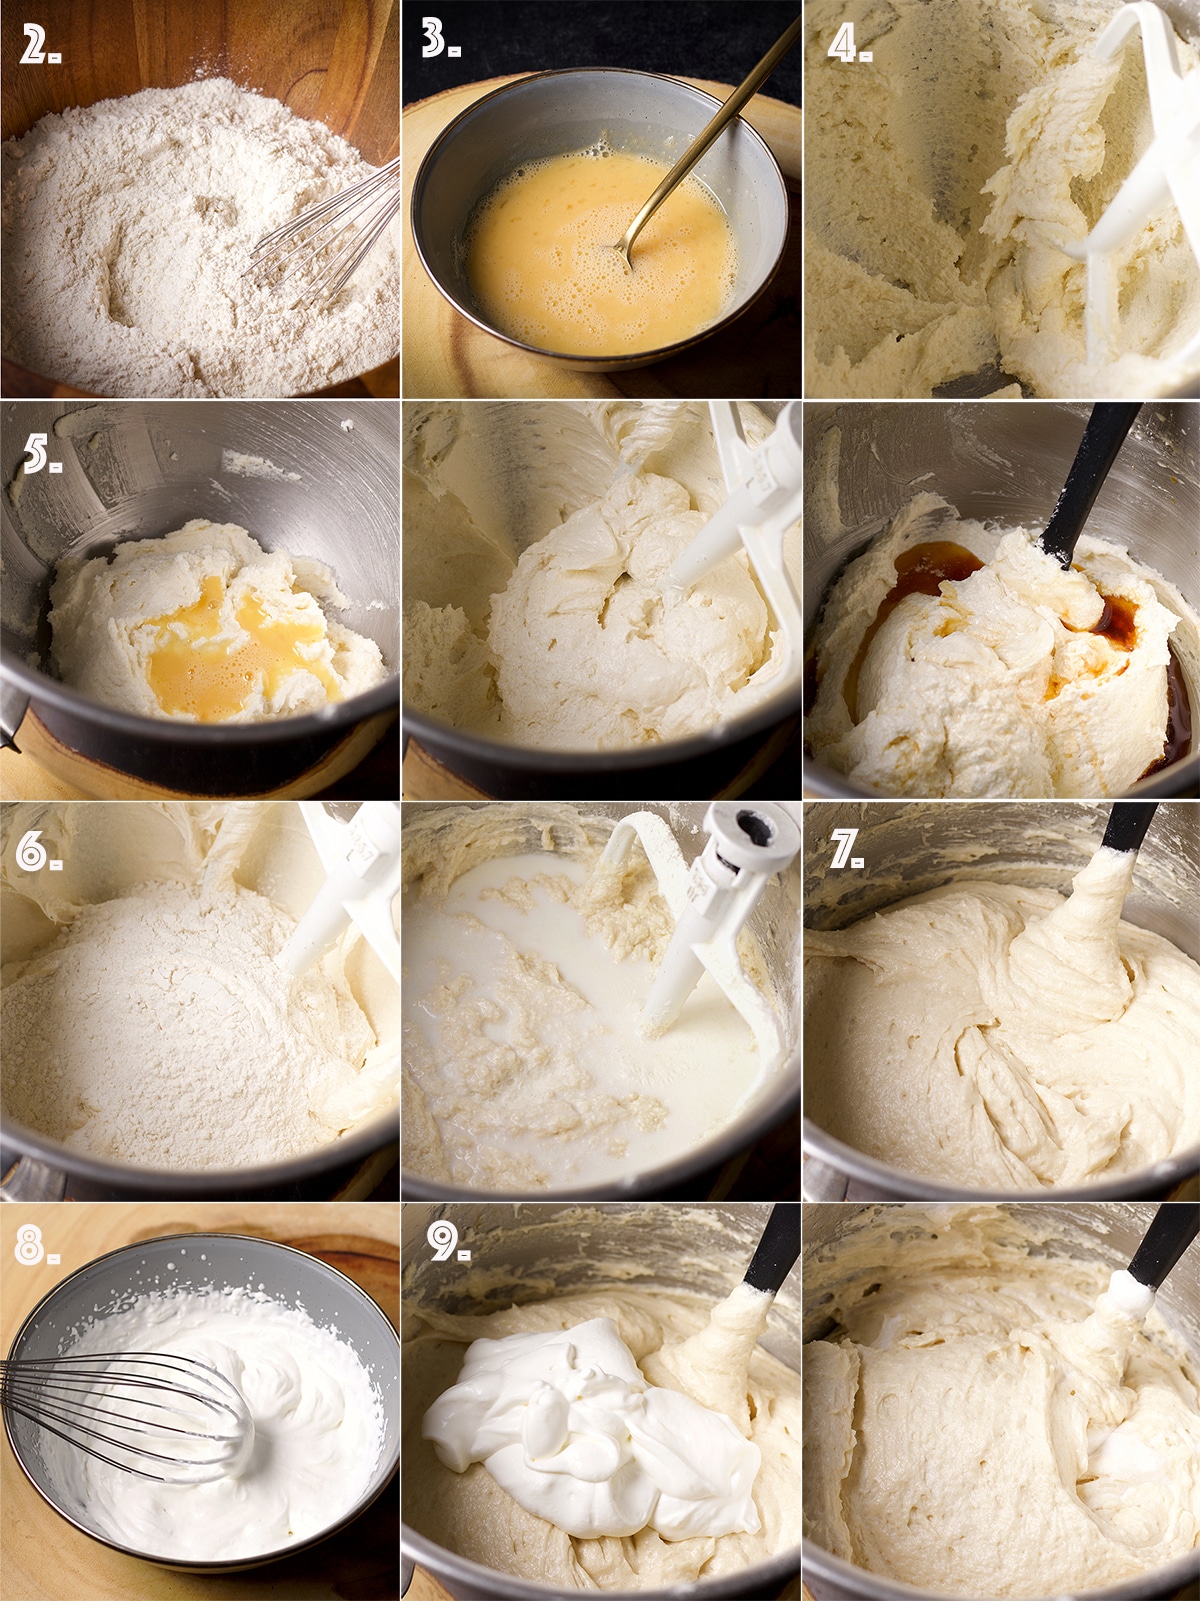 Twelve photos that show the step-by-step process for making white chocolate cake batter. The photos are numbered to correspond with the step in the recipe that they represent.